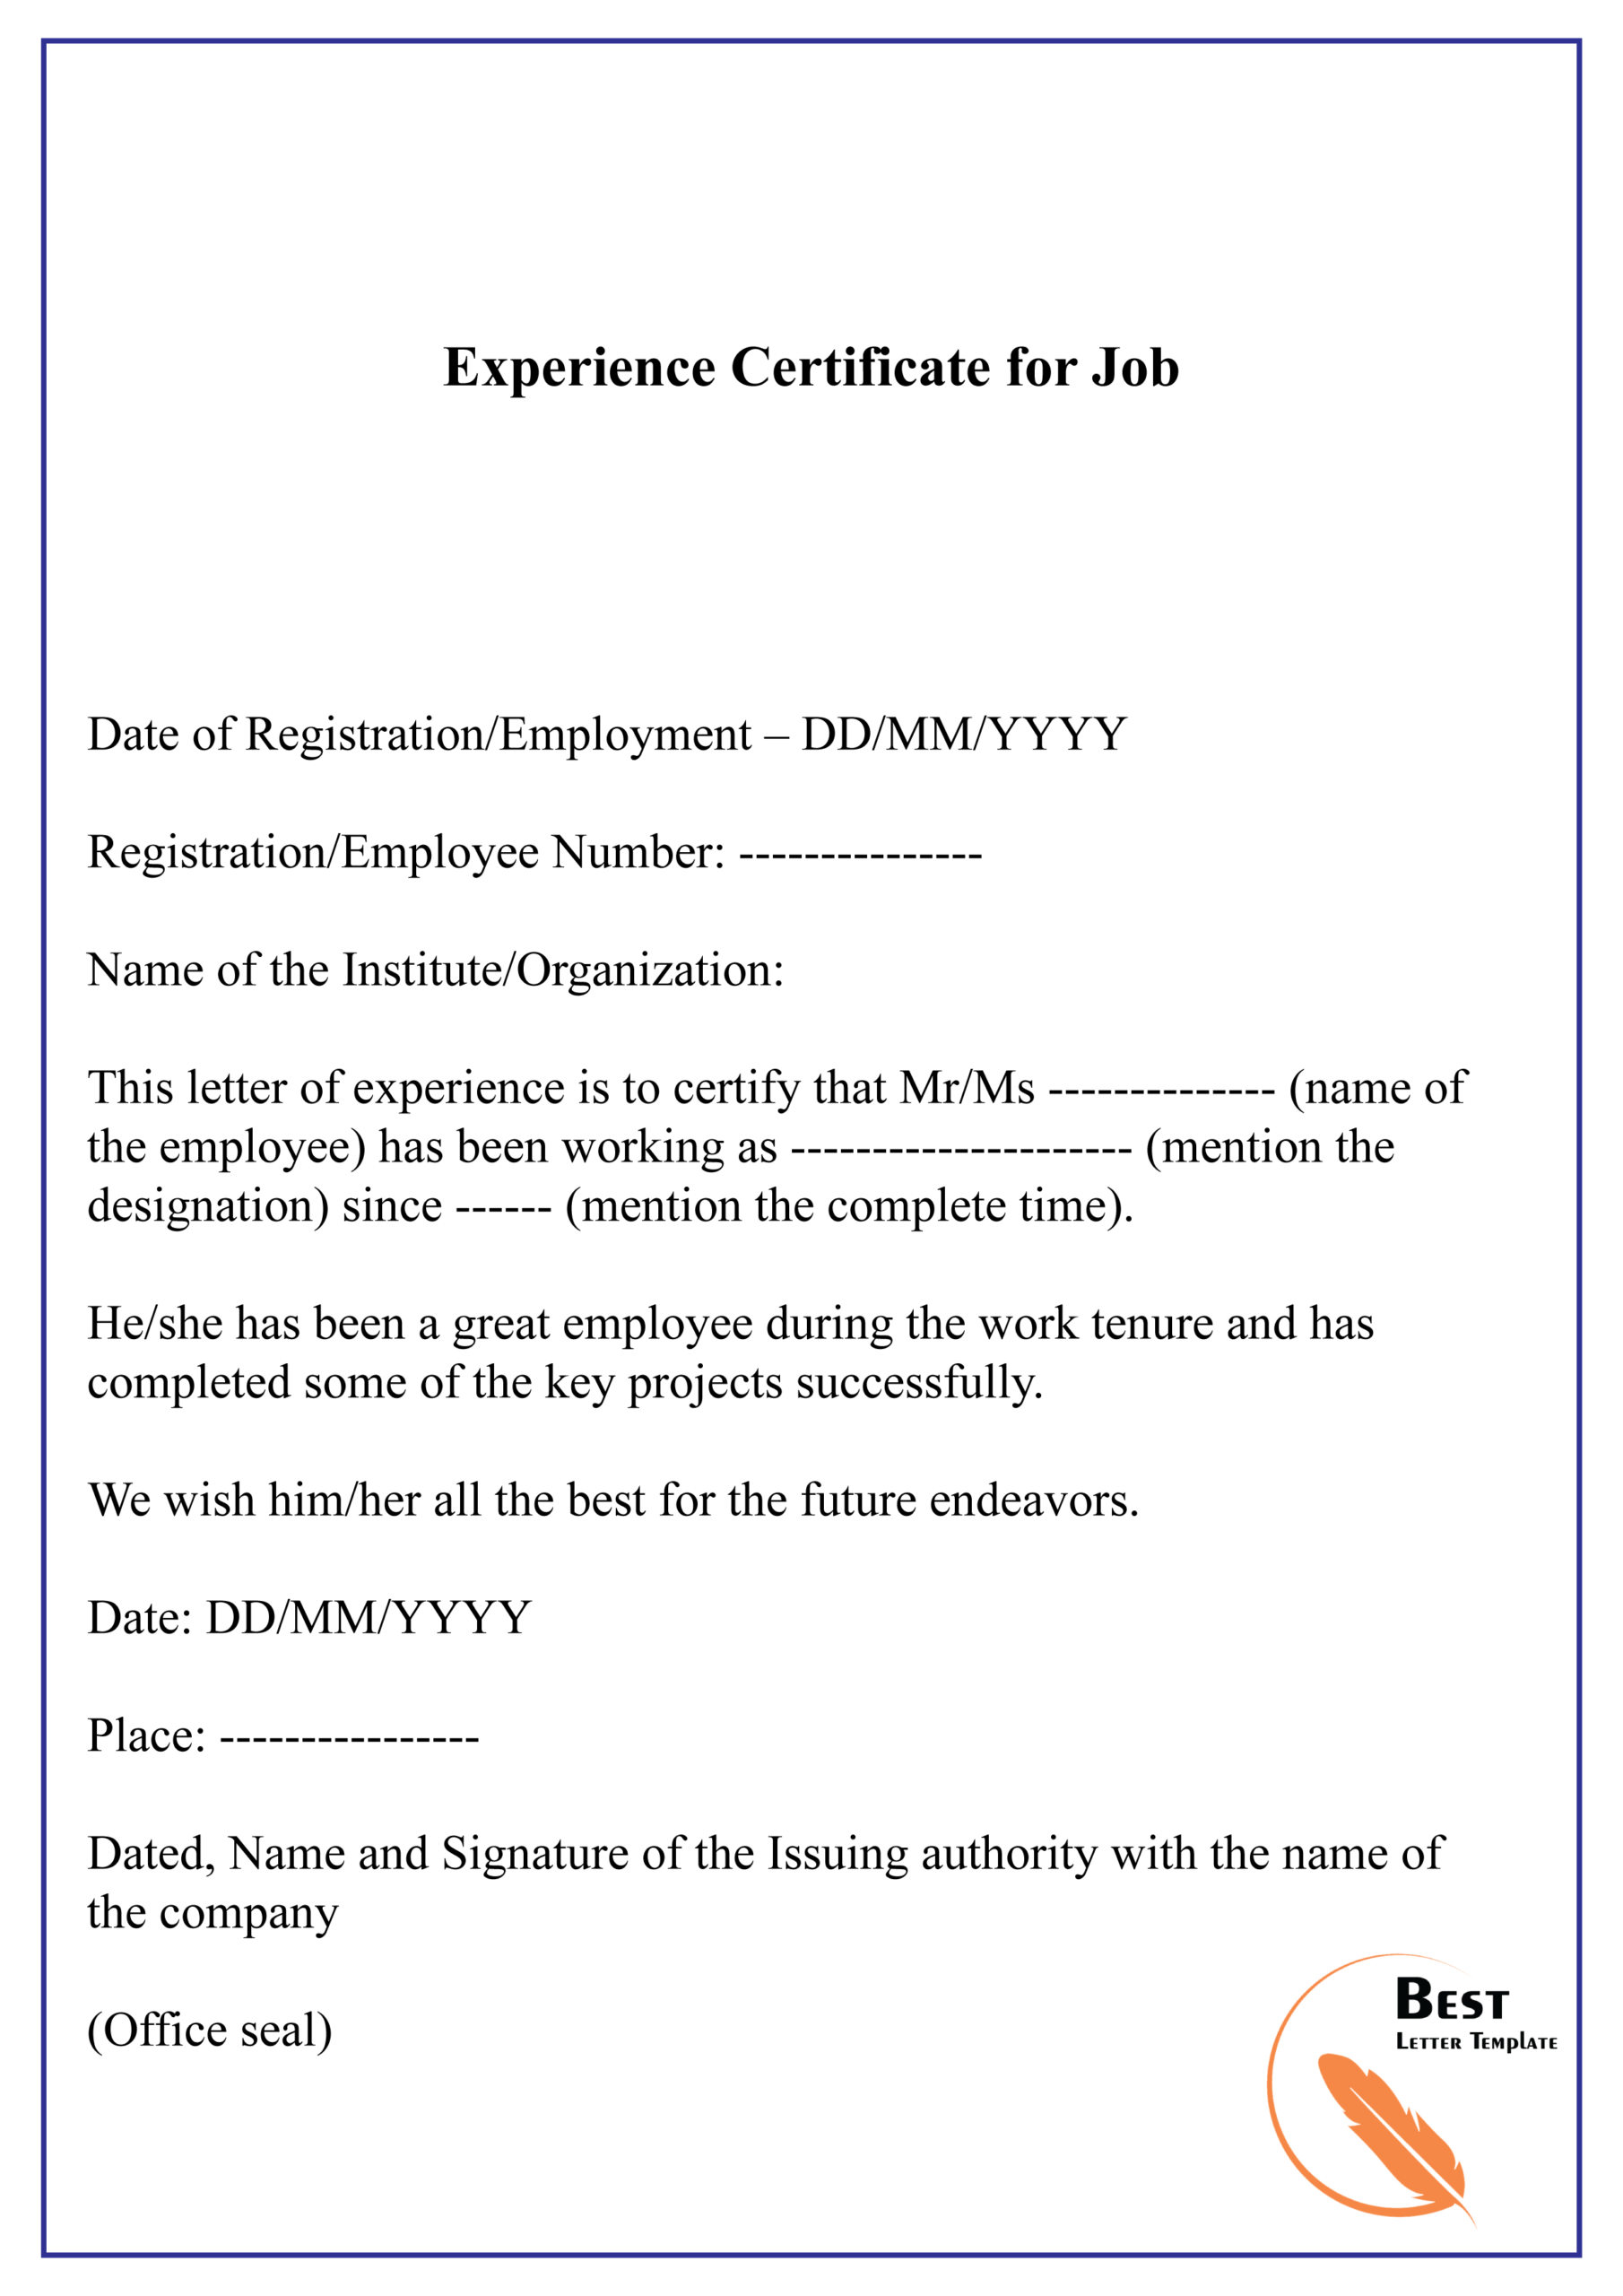 Experience Certificate For Job 01 | Best Letter Template Intended For Certificate Of Employment Template